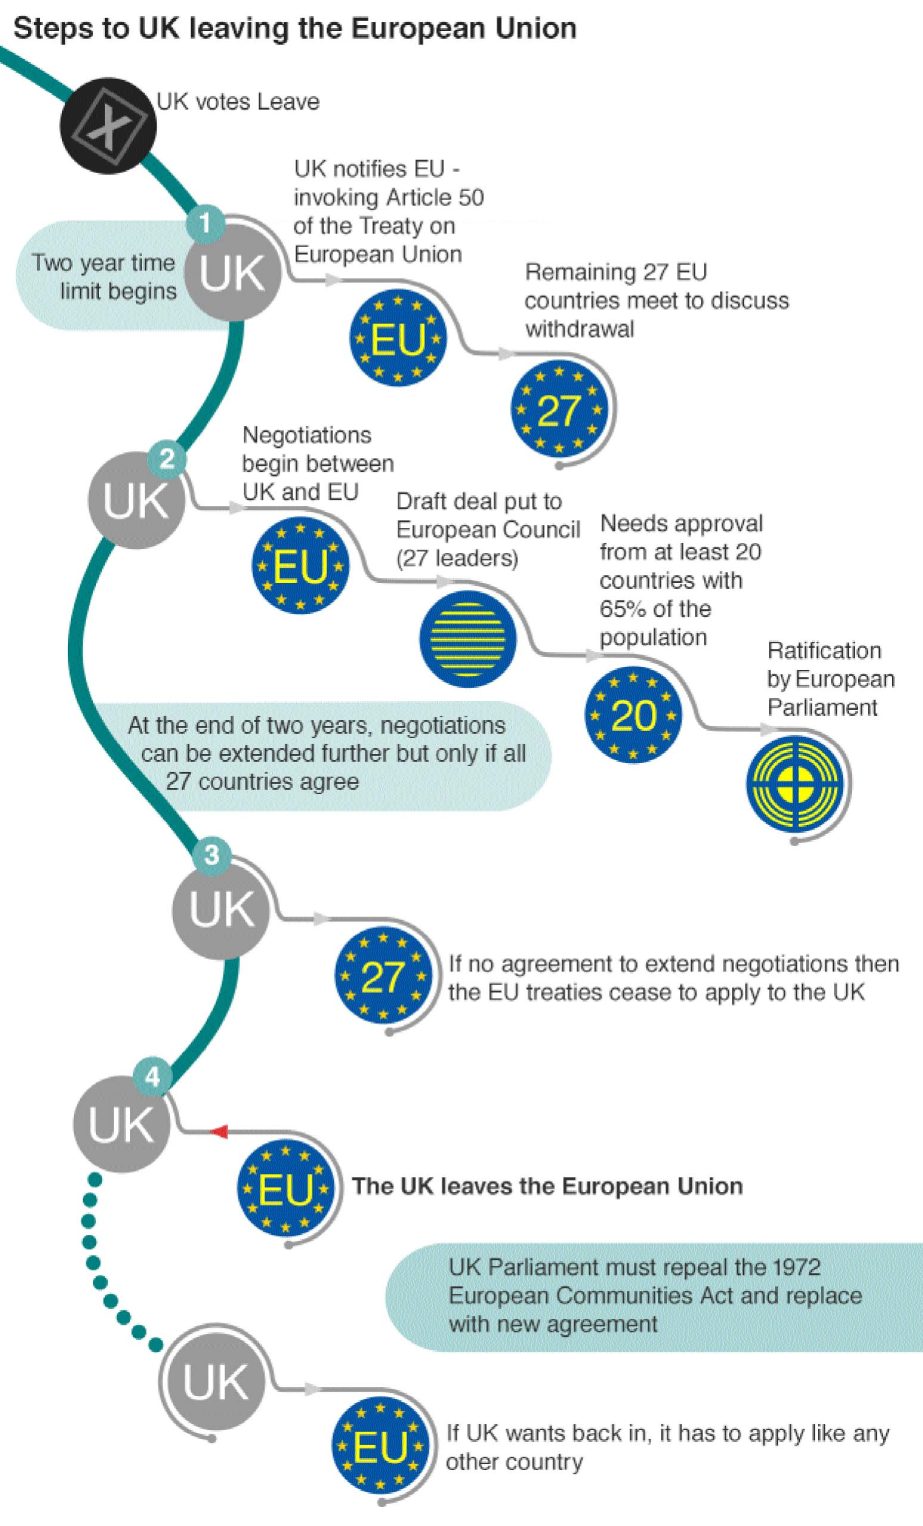 The process to take the UK out of the European Union starts with invoking Article 50 and will take at least two years from that point.